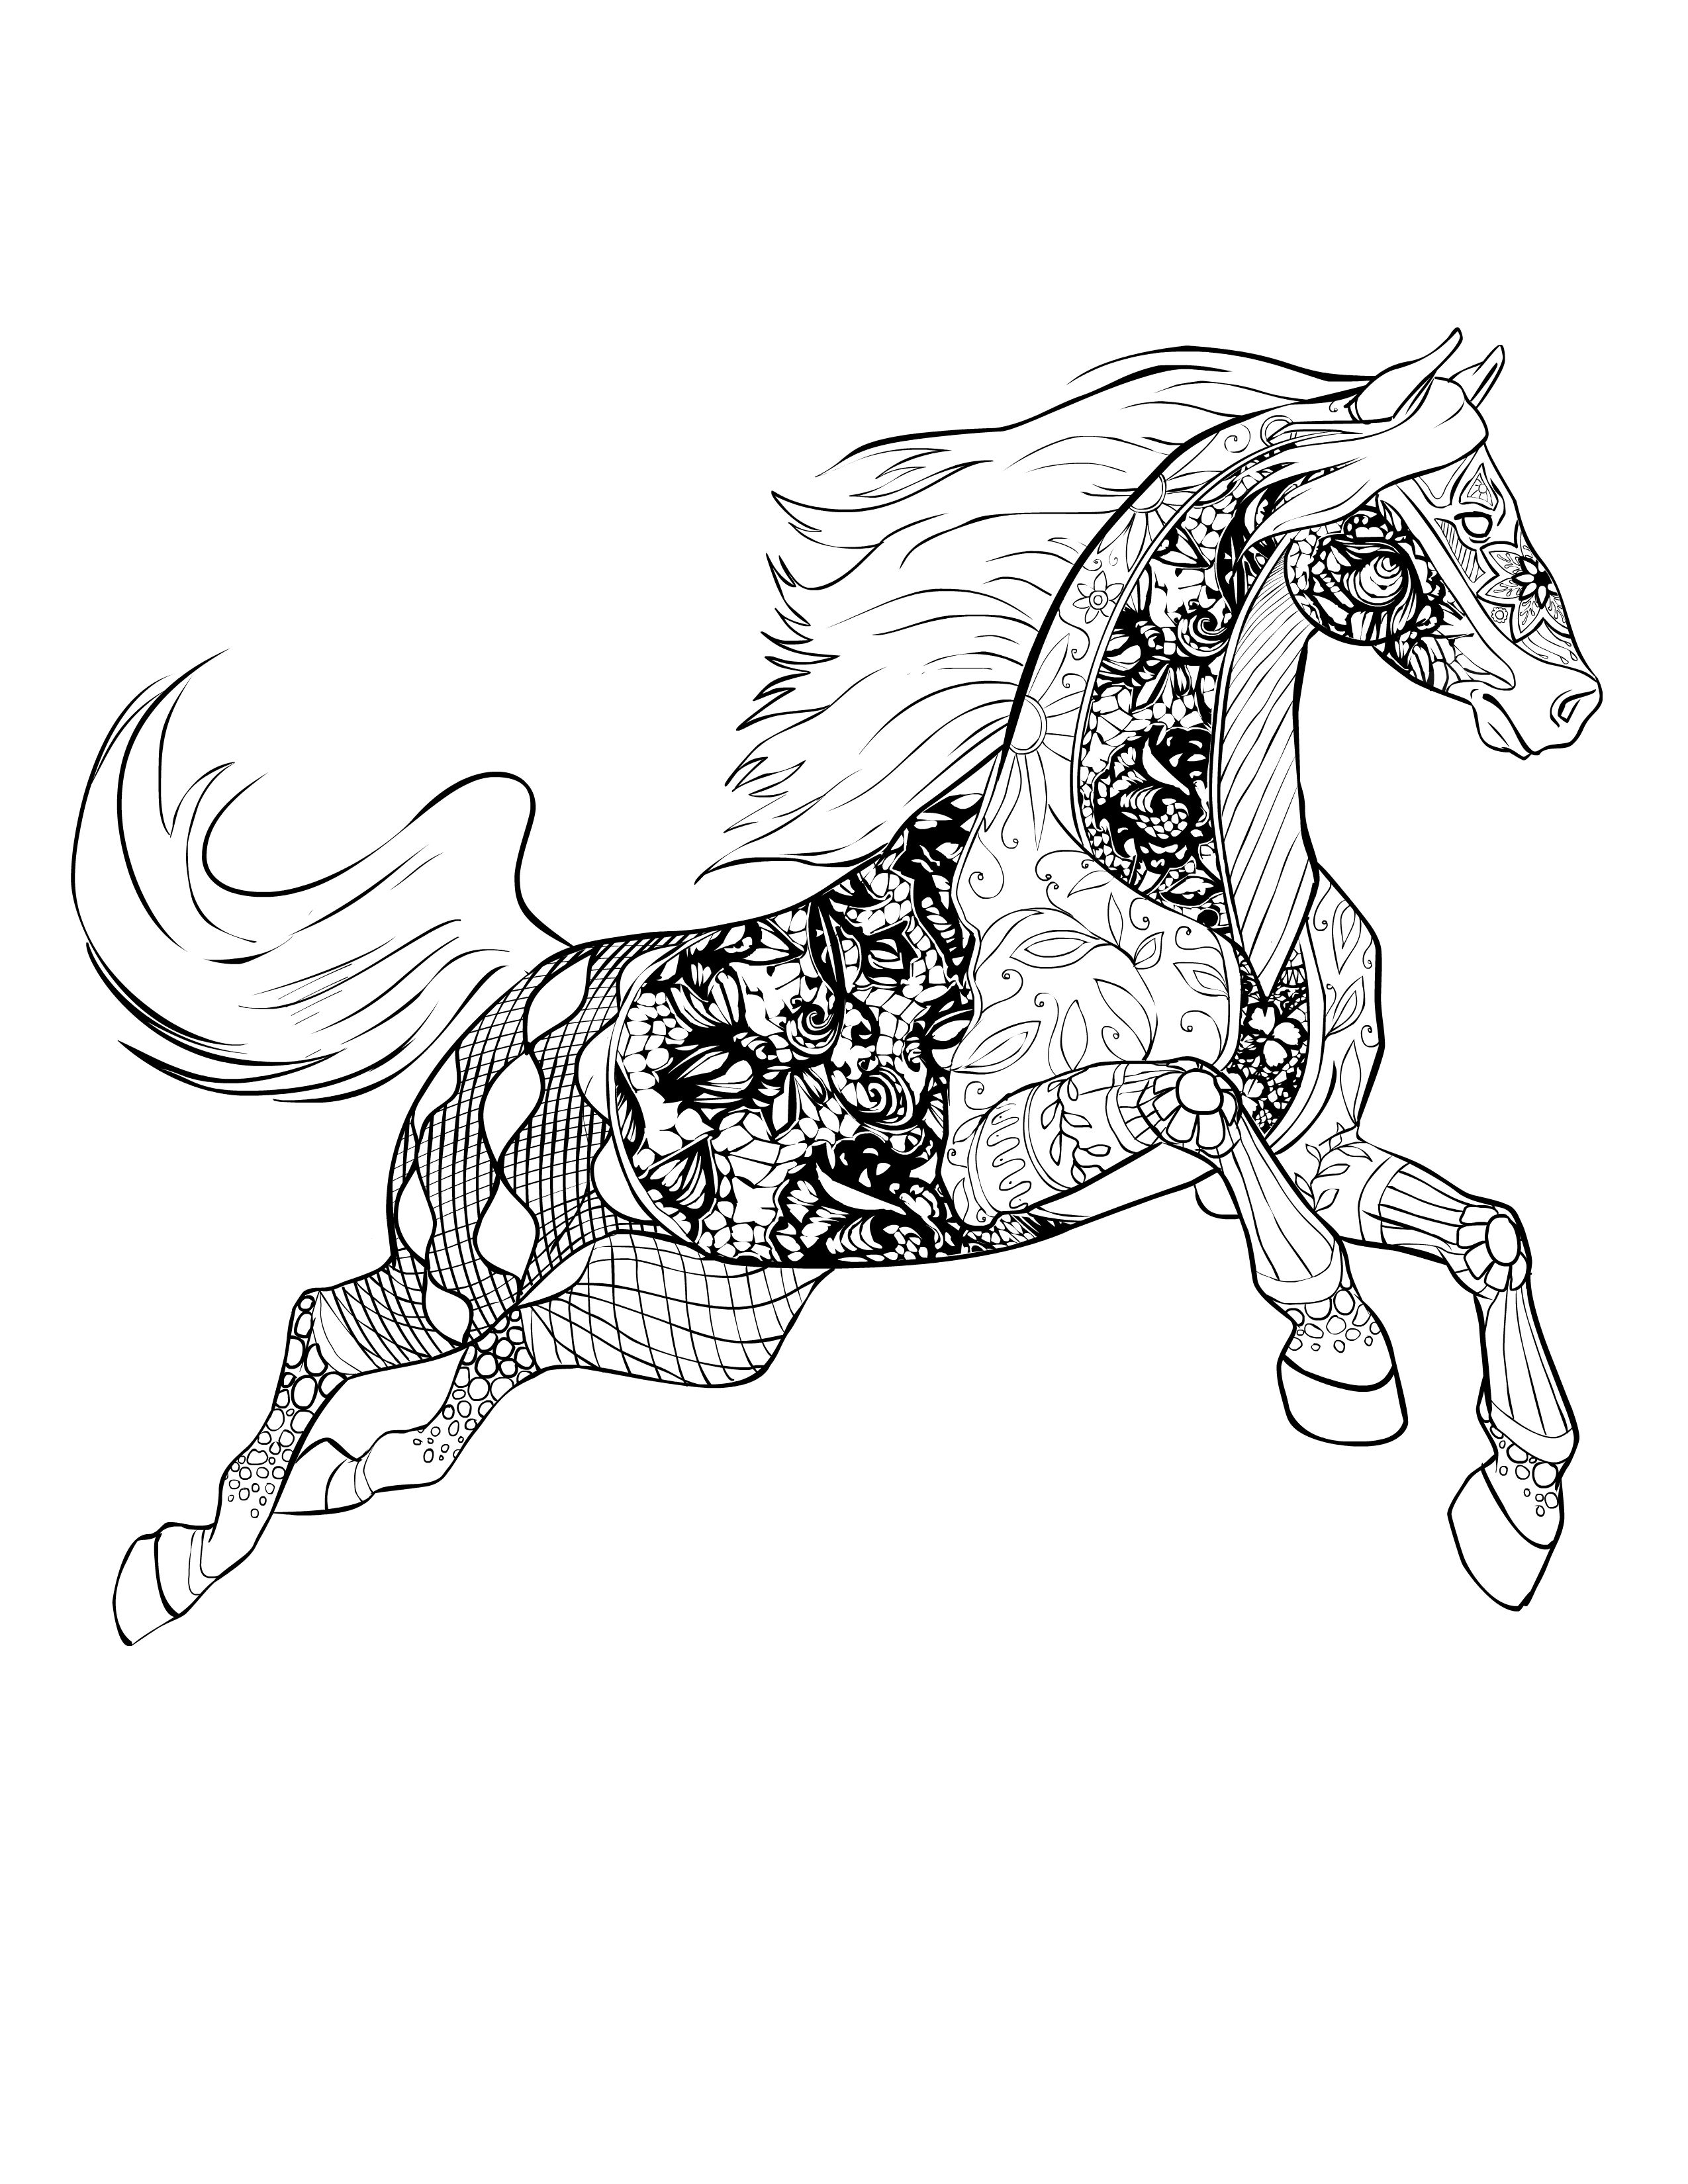 Horse coloring pages for adults